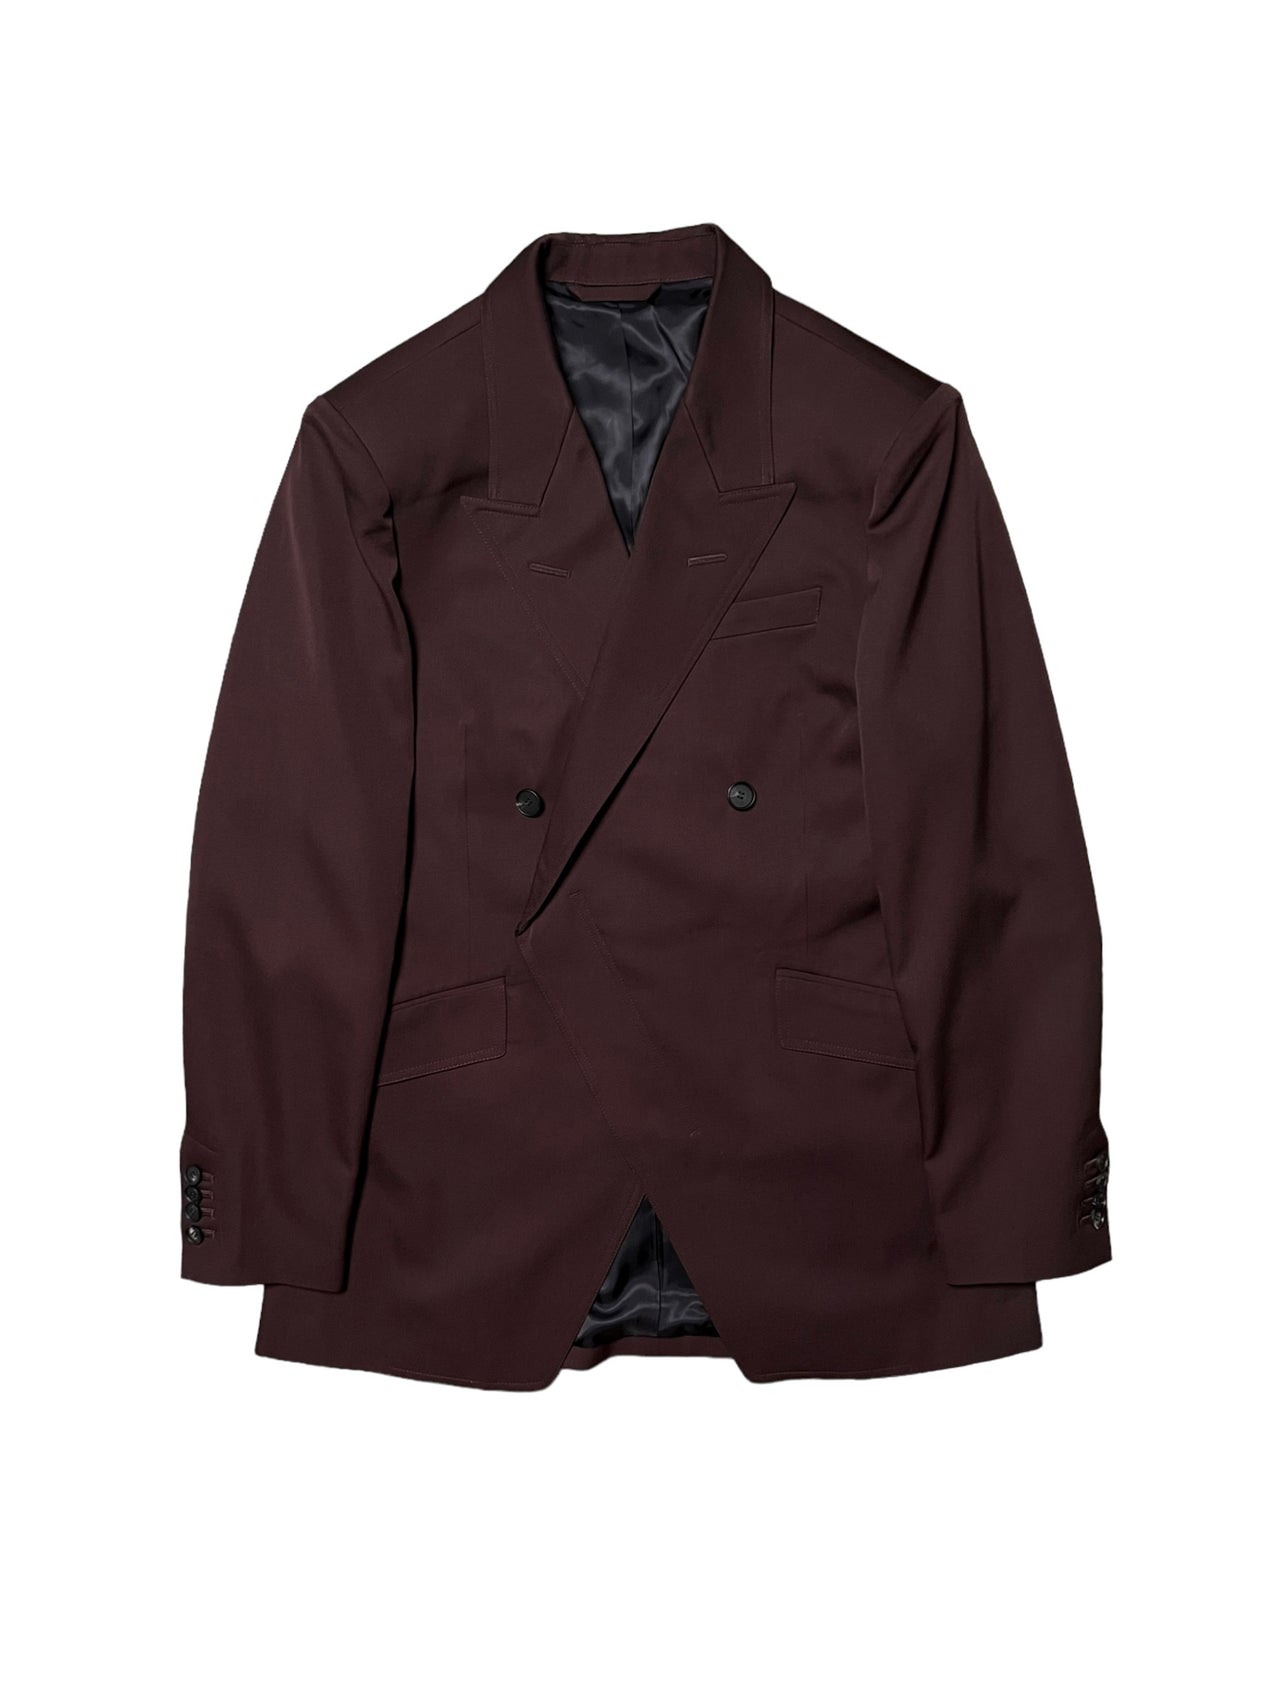 FITTED BLAZER in BROWN